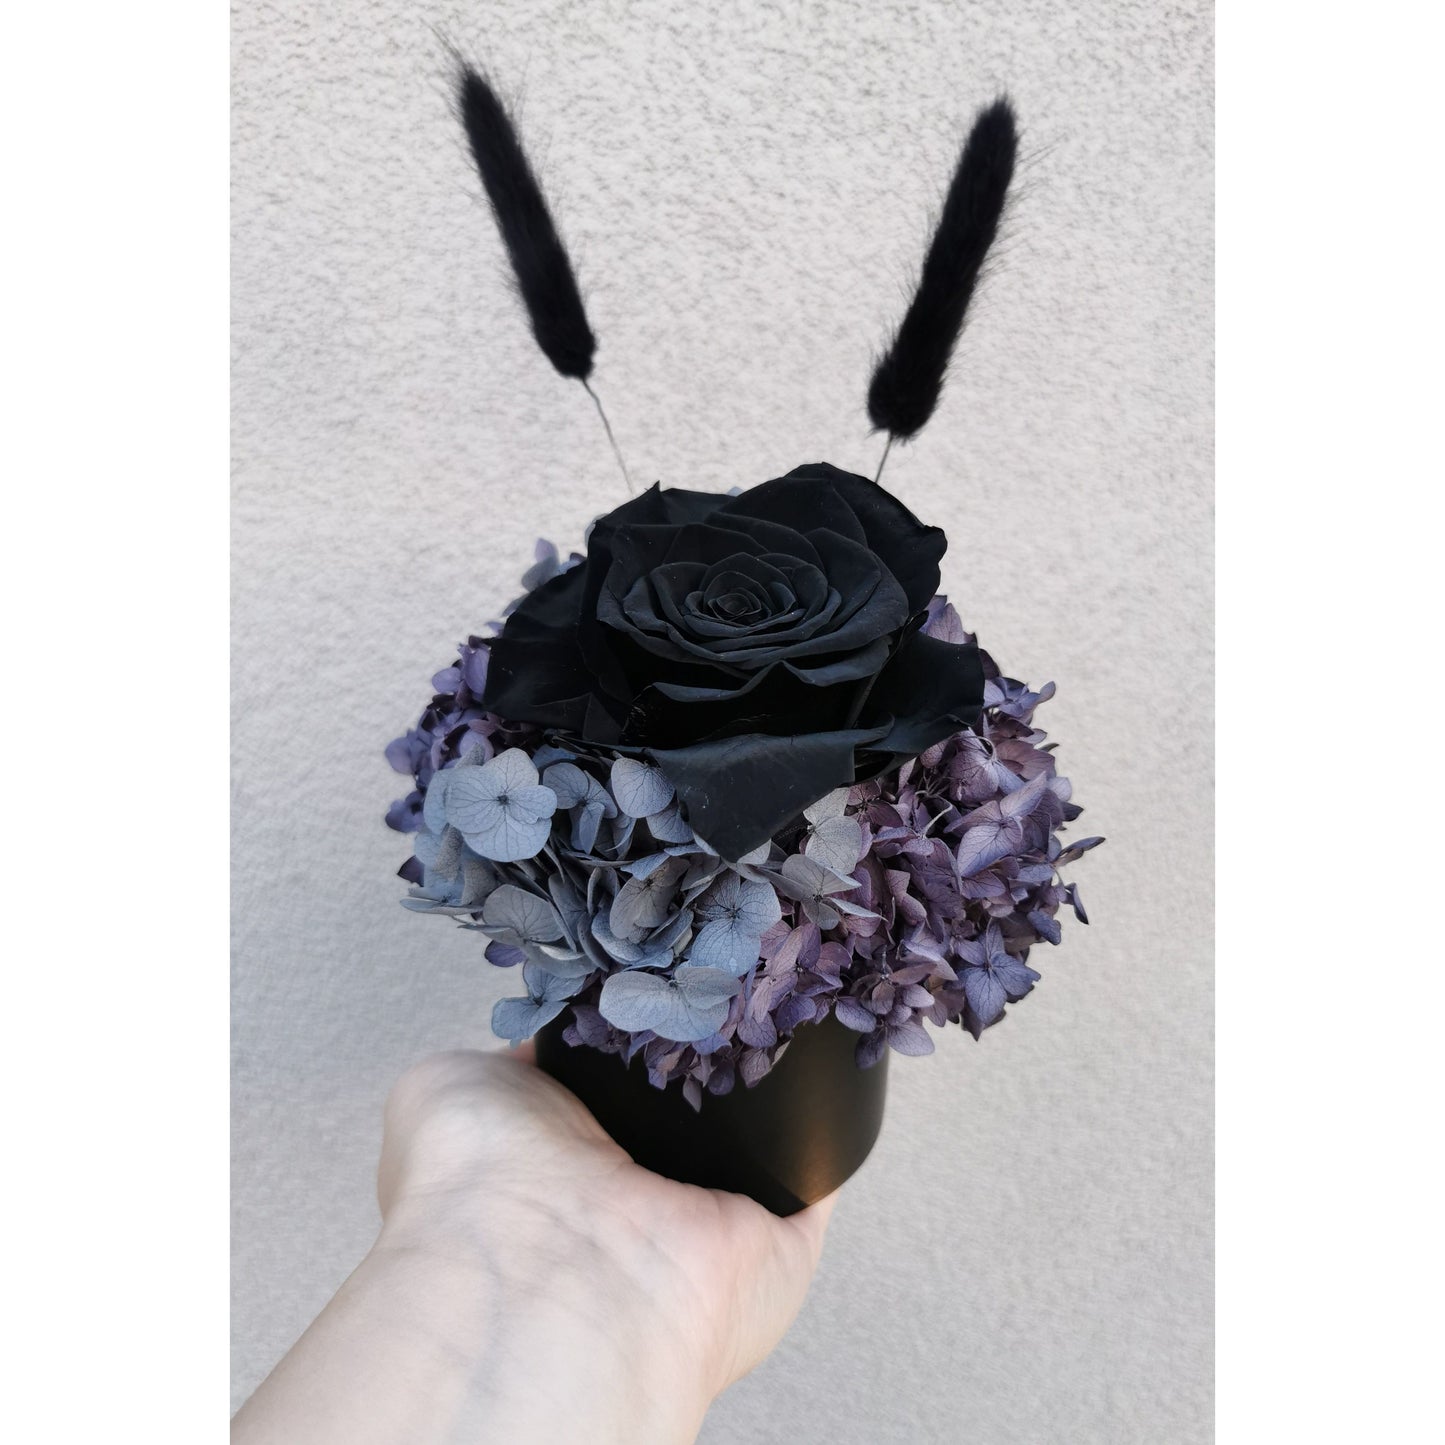 Black, grey & purple dried & preserved flower arrangement in mini black pot featuring a black rose and black bunny tails. Photo shows arrangement being held up by hand against a blank wall